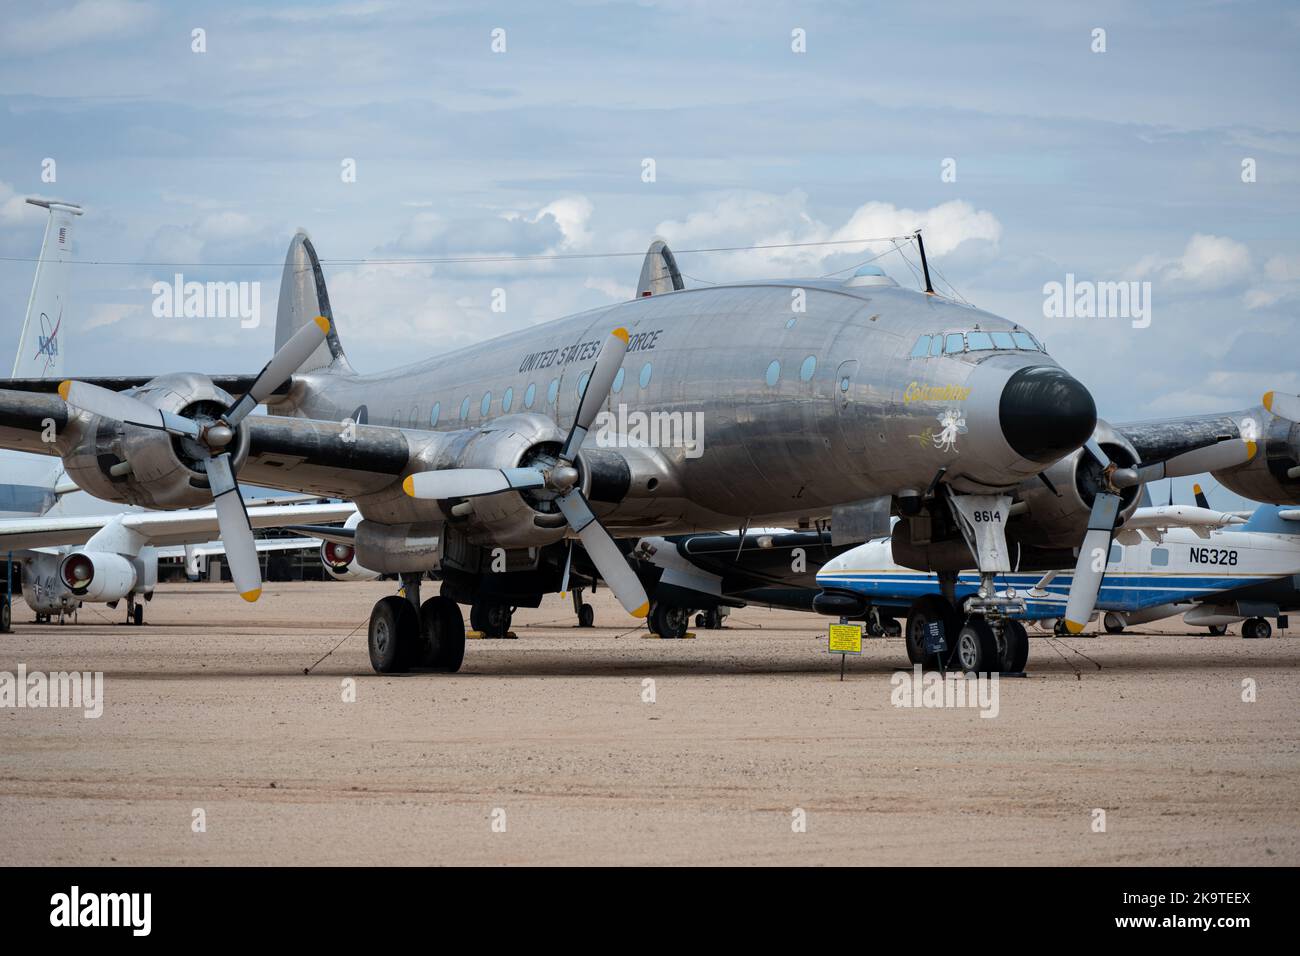 A Lockheed Constellation on display at the Pima Air and Space Museum Stock Photo